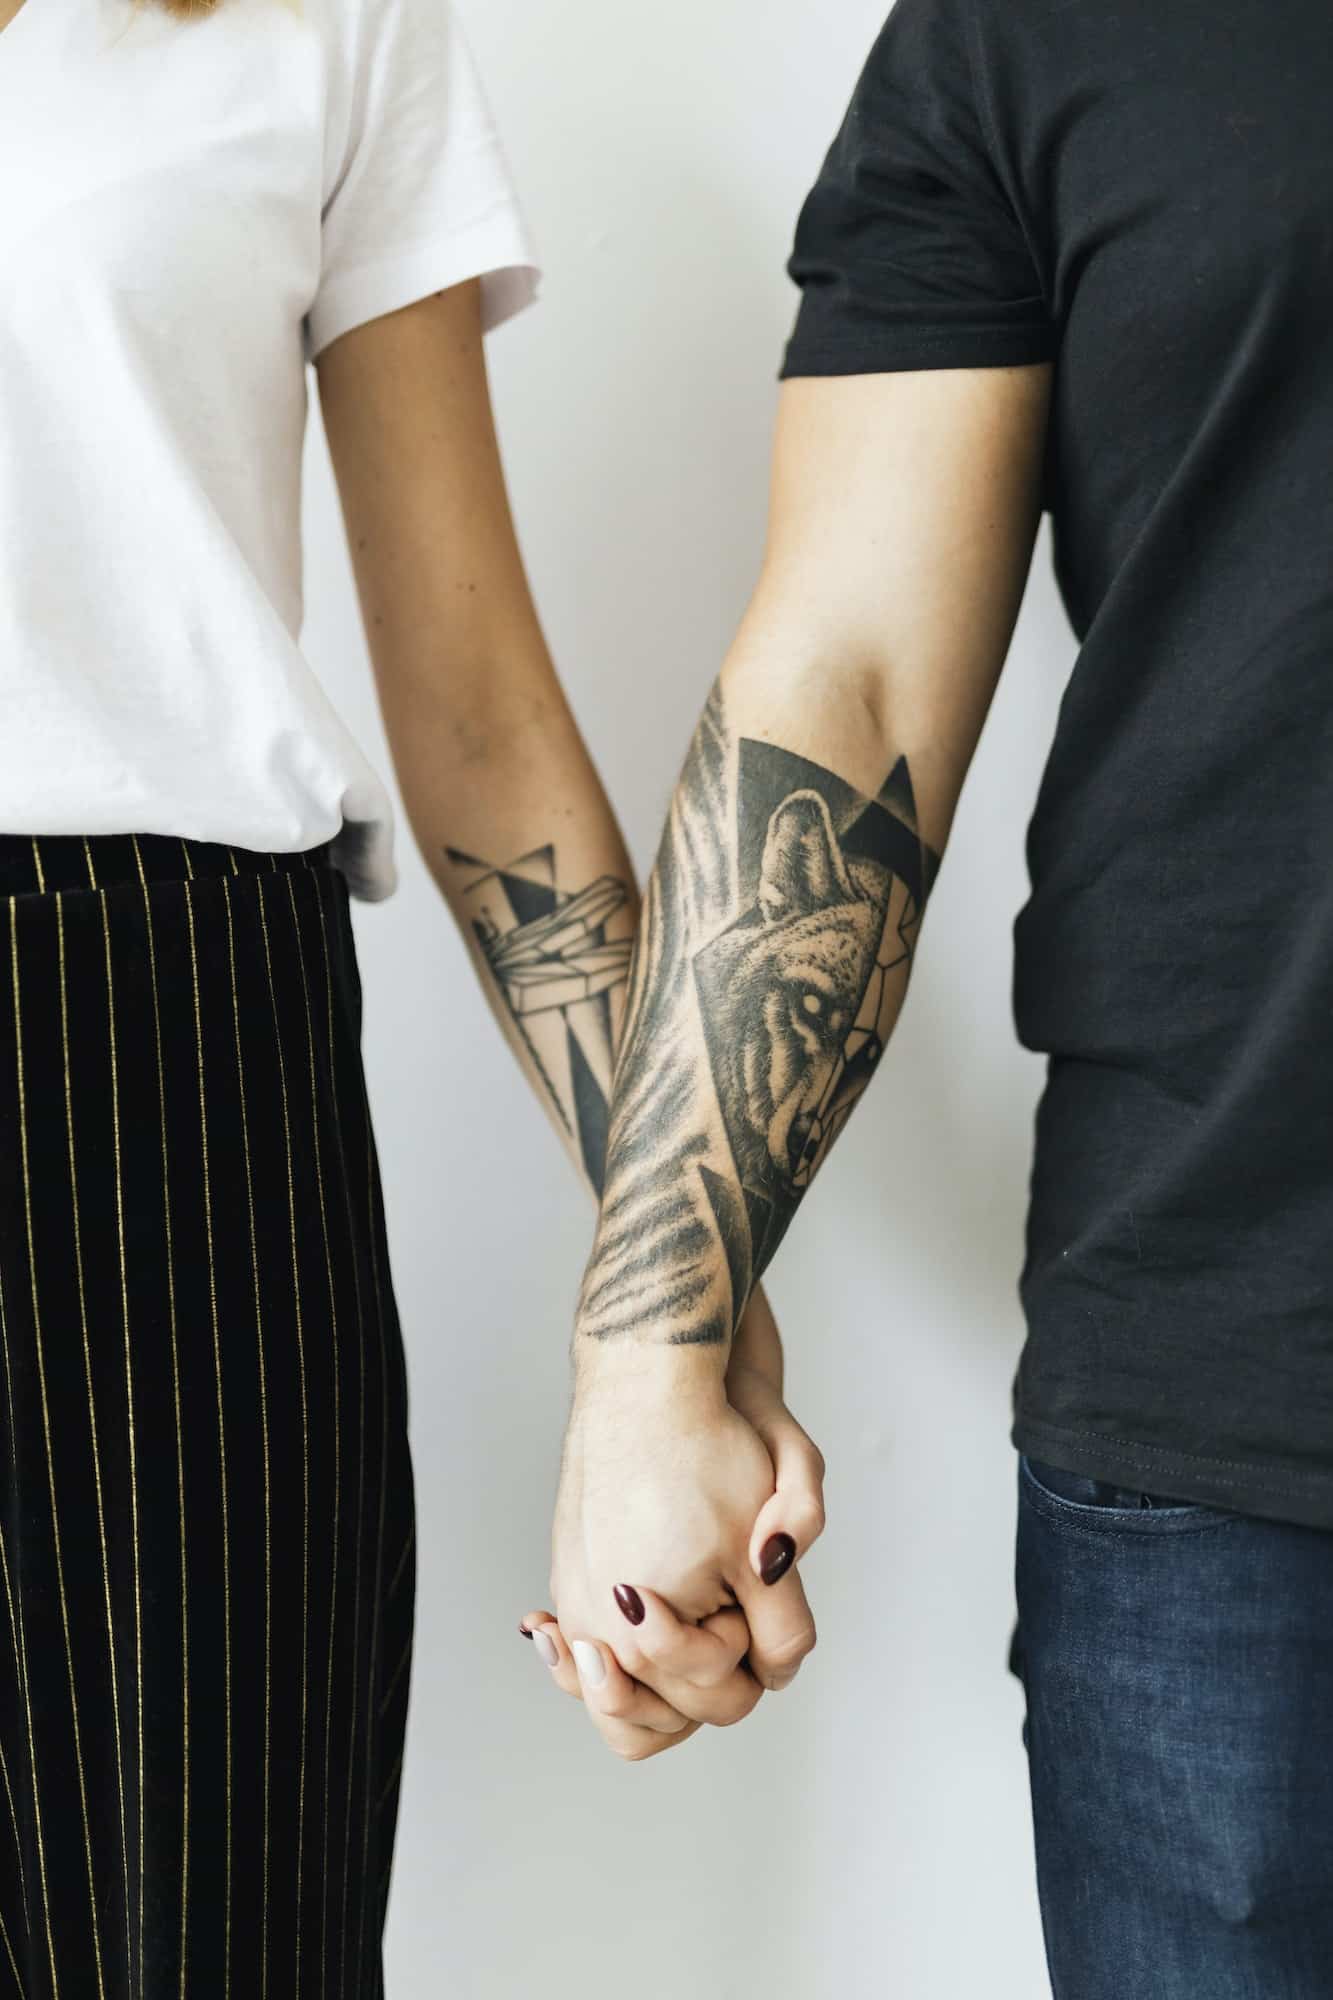 Tattooed hands holding hands, Tribal Tattoo for Love